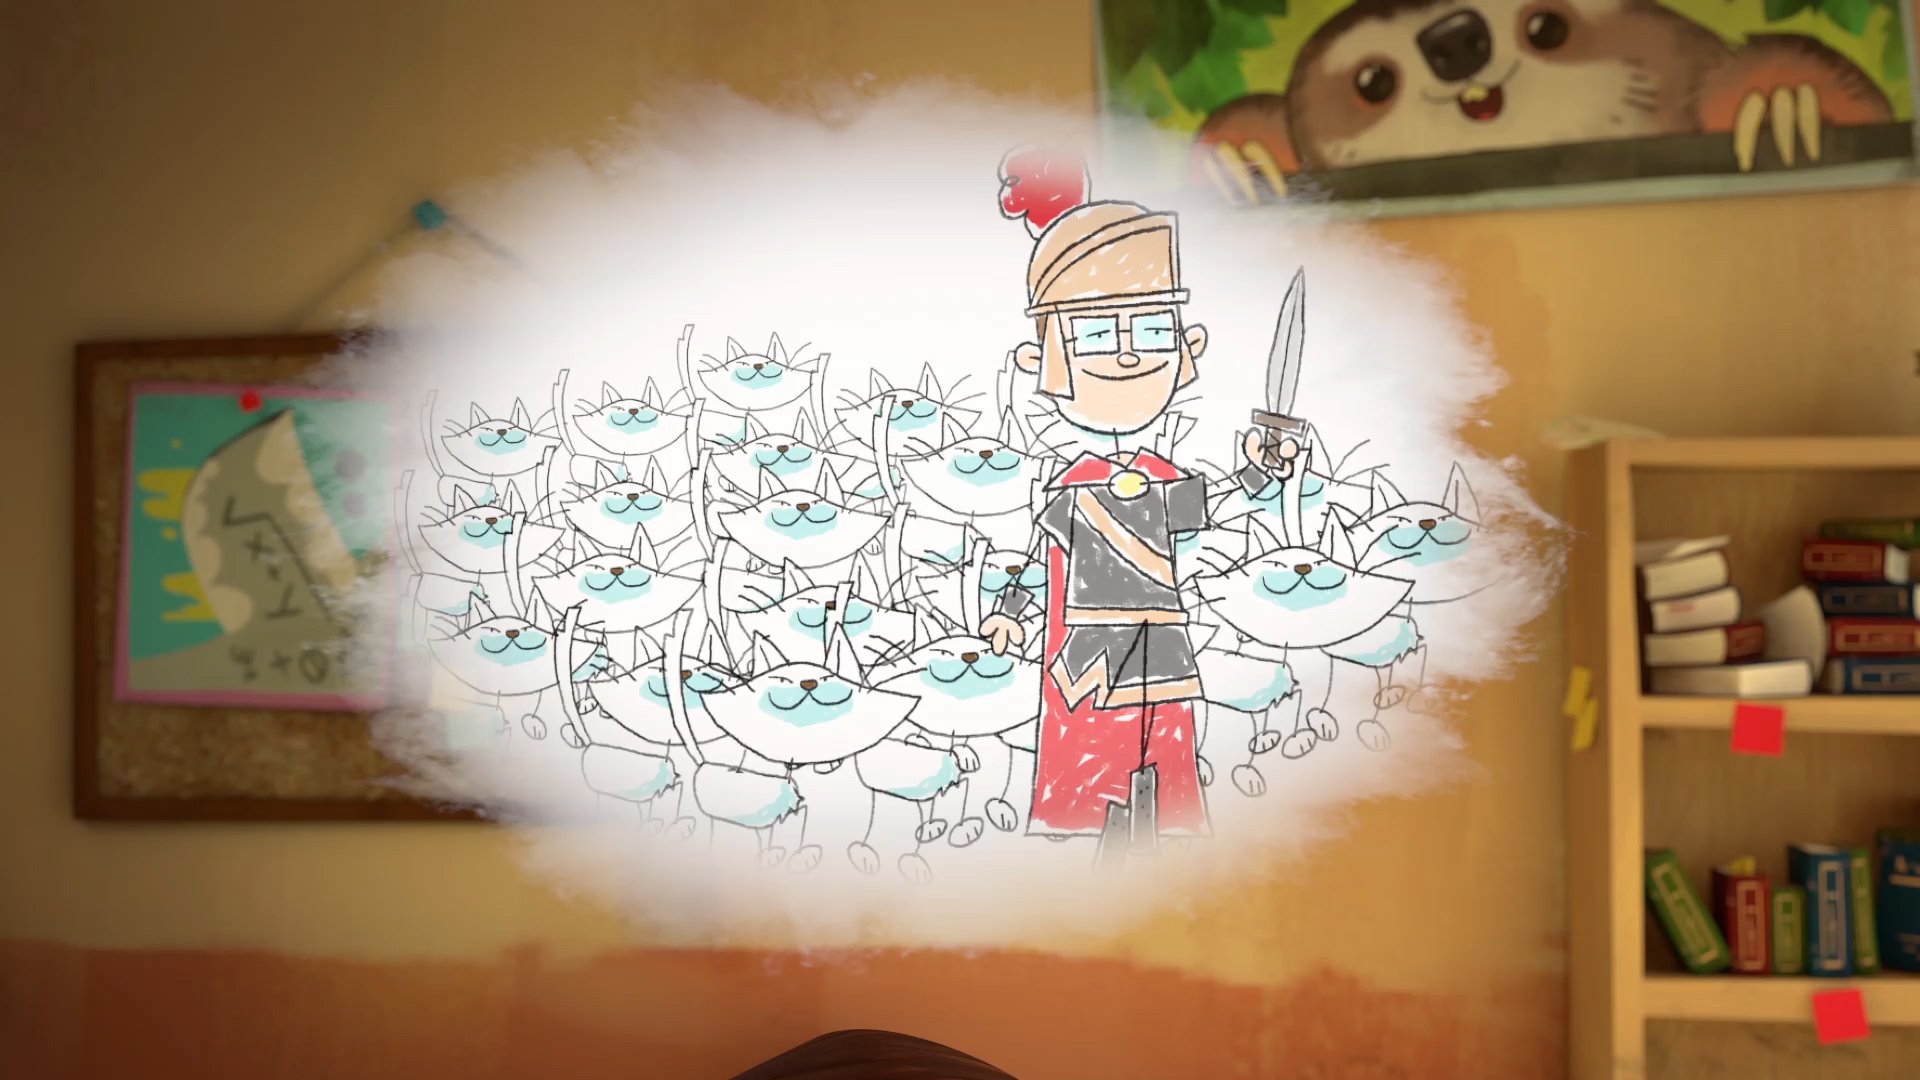 Walter and his cat army